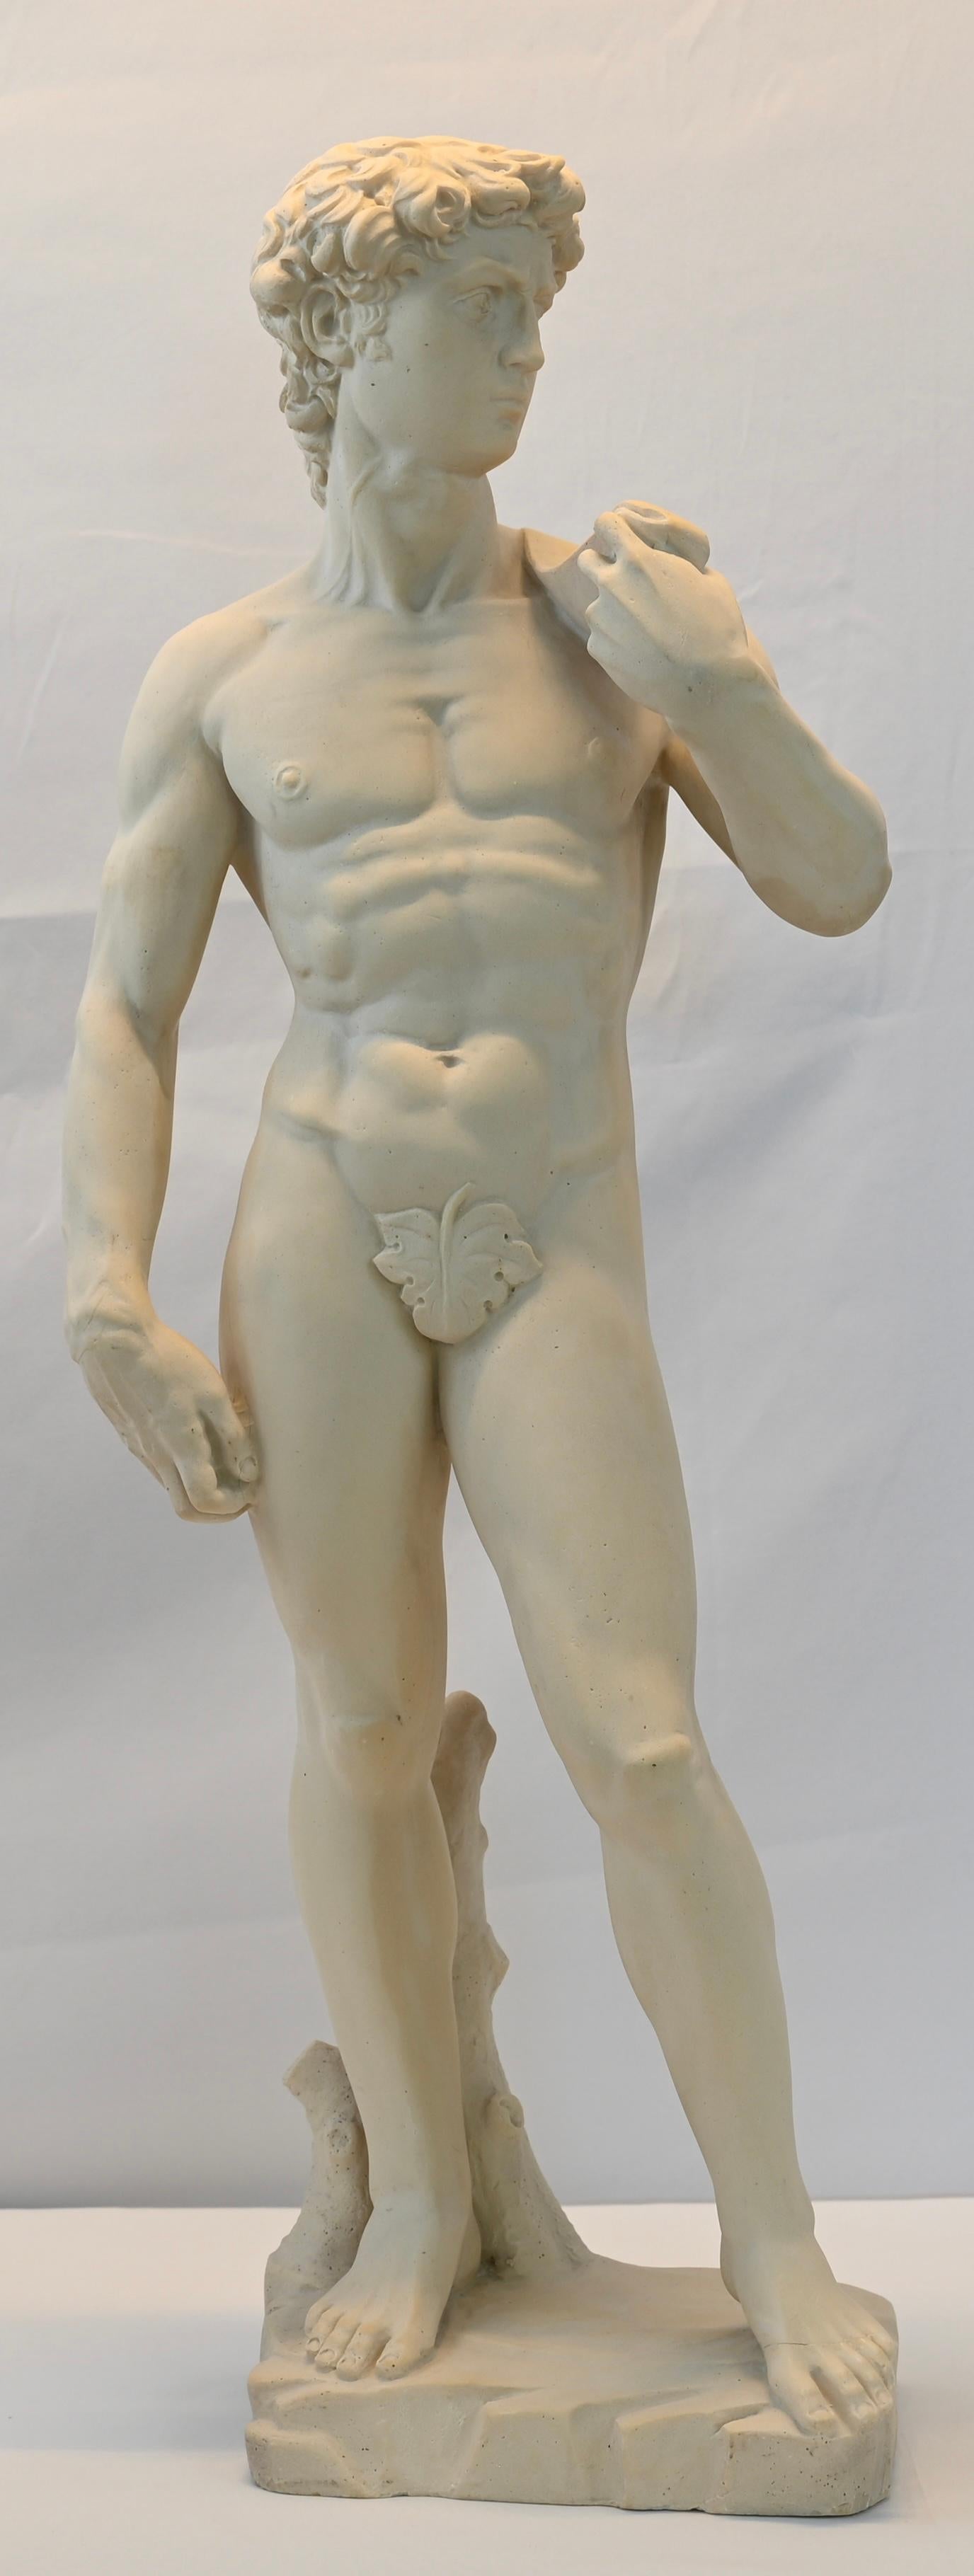 Hand-Crafted Roman Classical Nude Male Marble Sculpture by Lorenzo dal Torrione, Italy For Sale